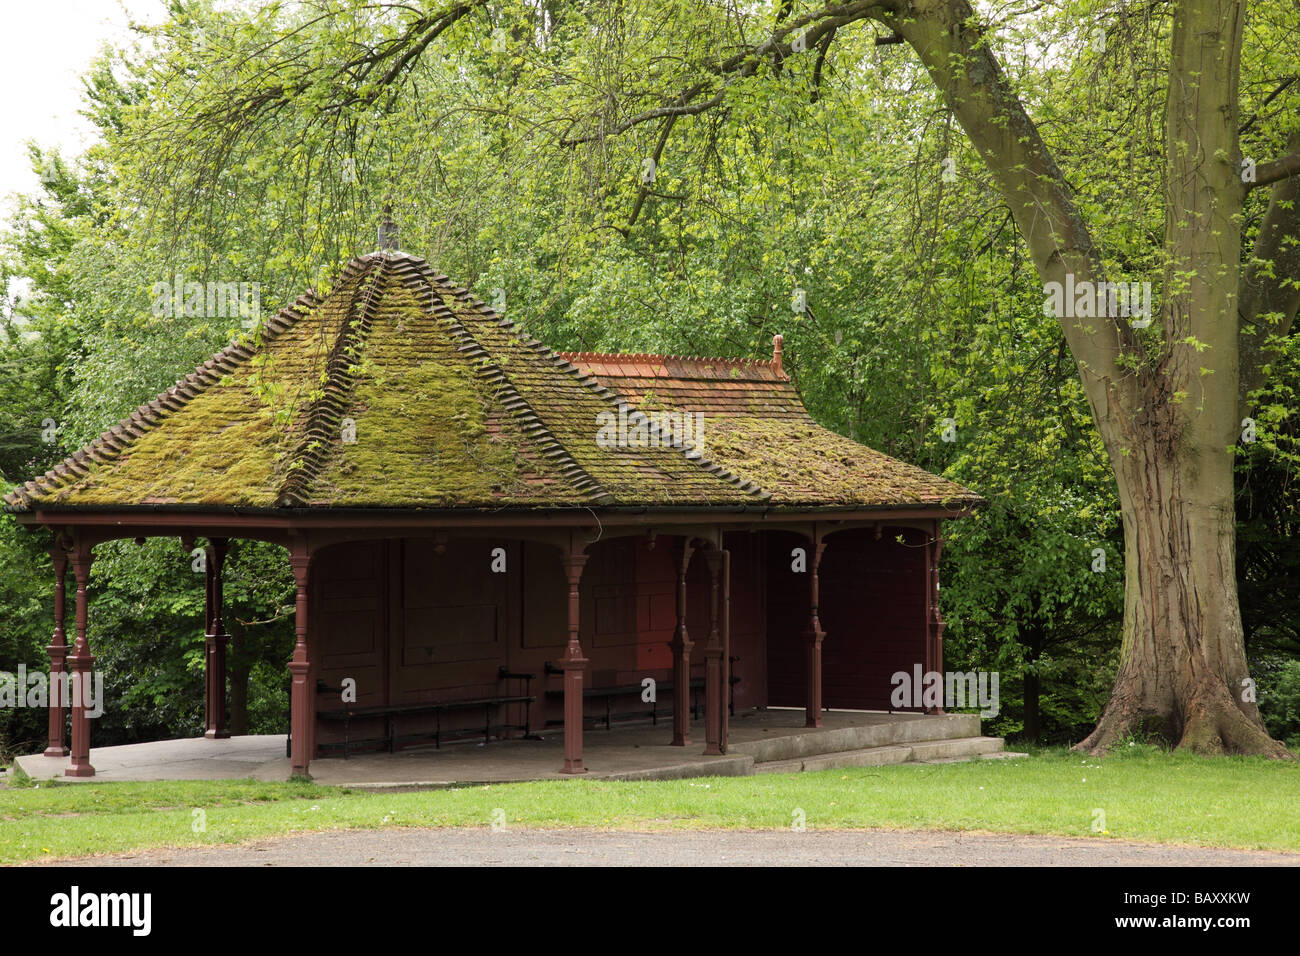 Shelter in The Royal Victoria Park, City of Bath, Somerset, England, UK Stock Photo